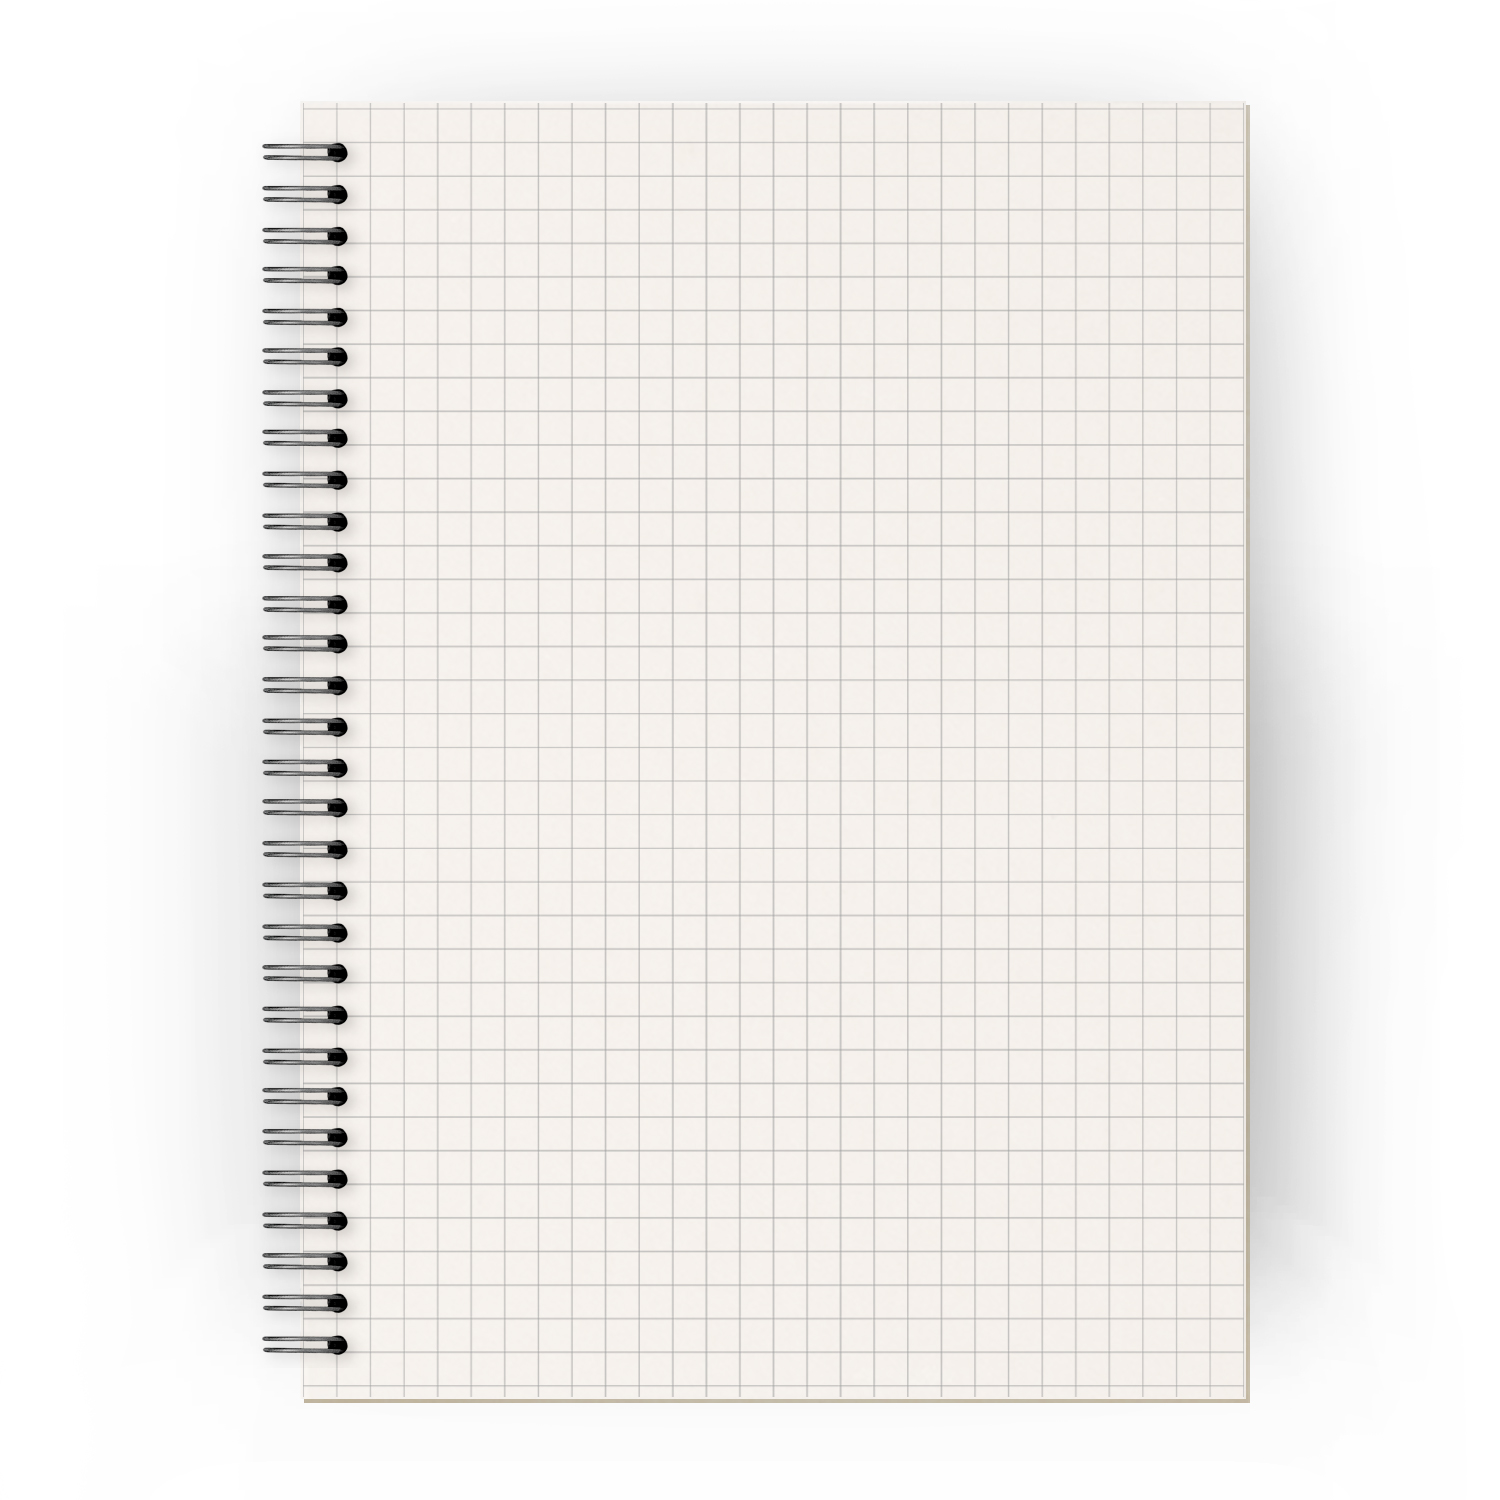 Archmesh » A4 Square Grid Notebook, Dot, Isometric, Square